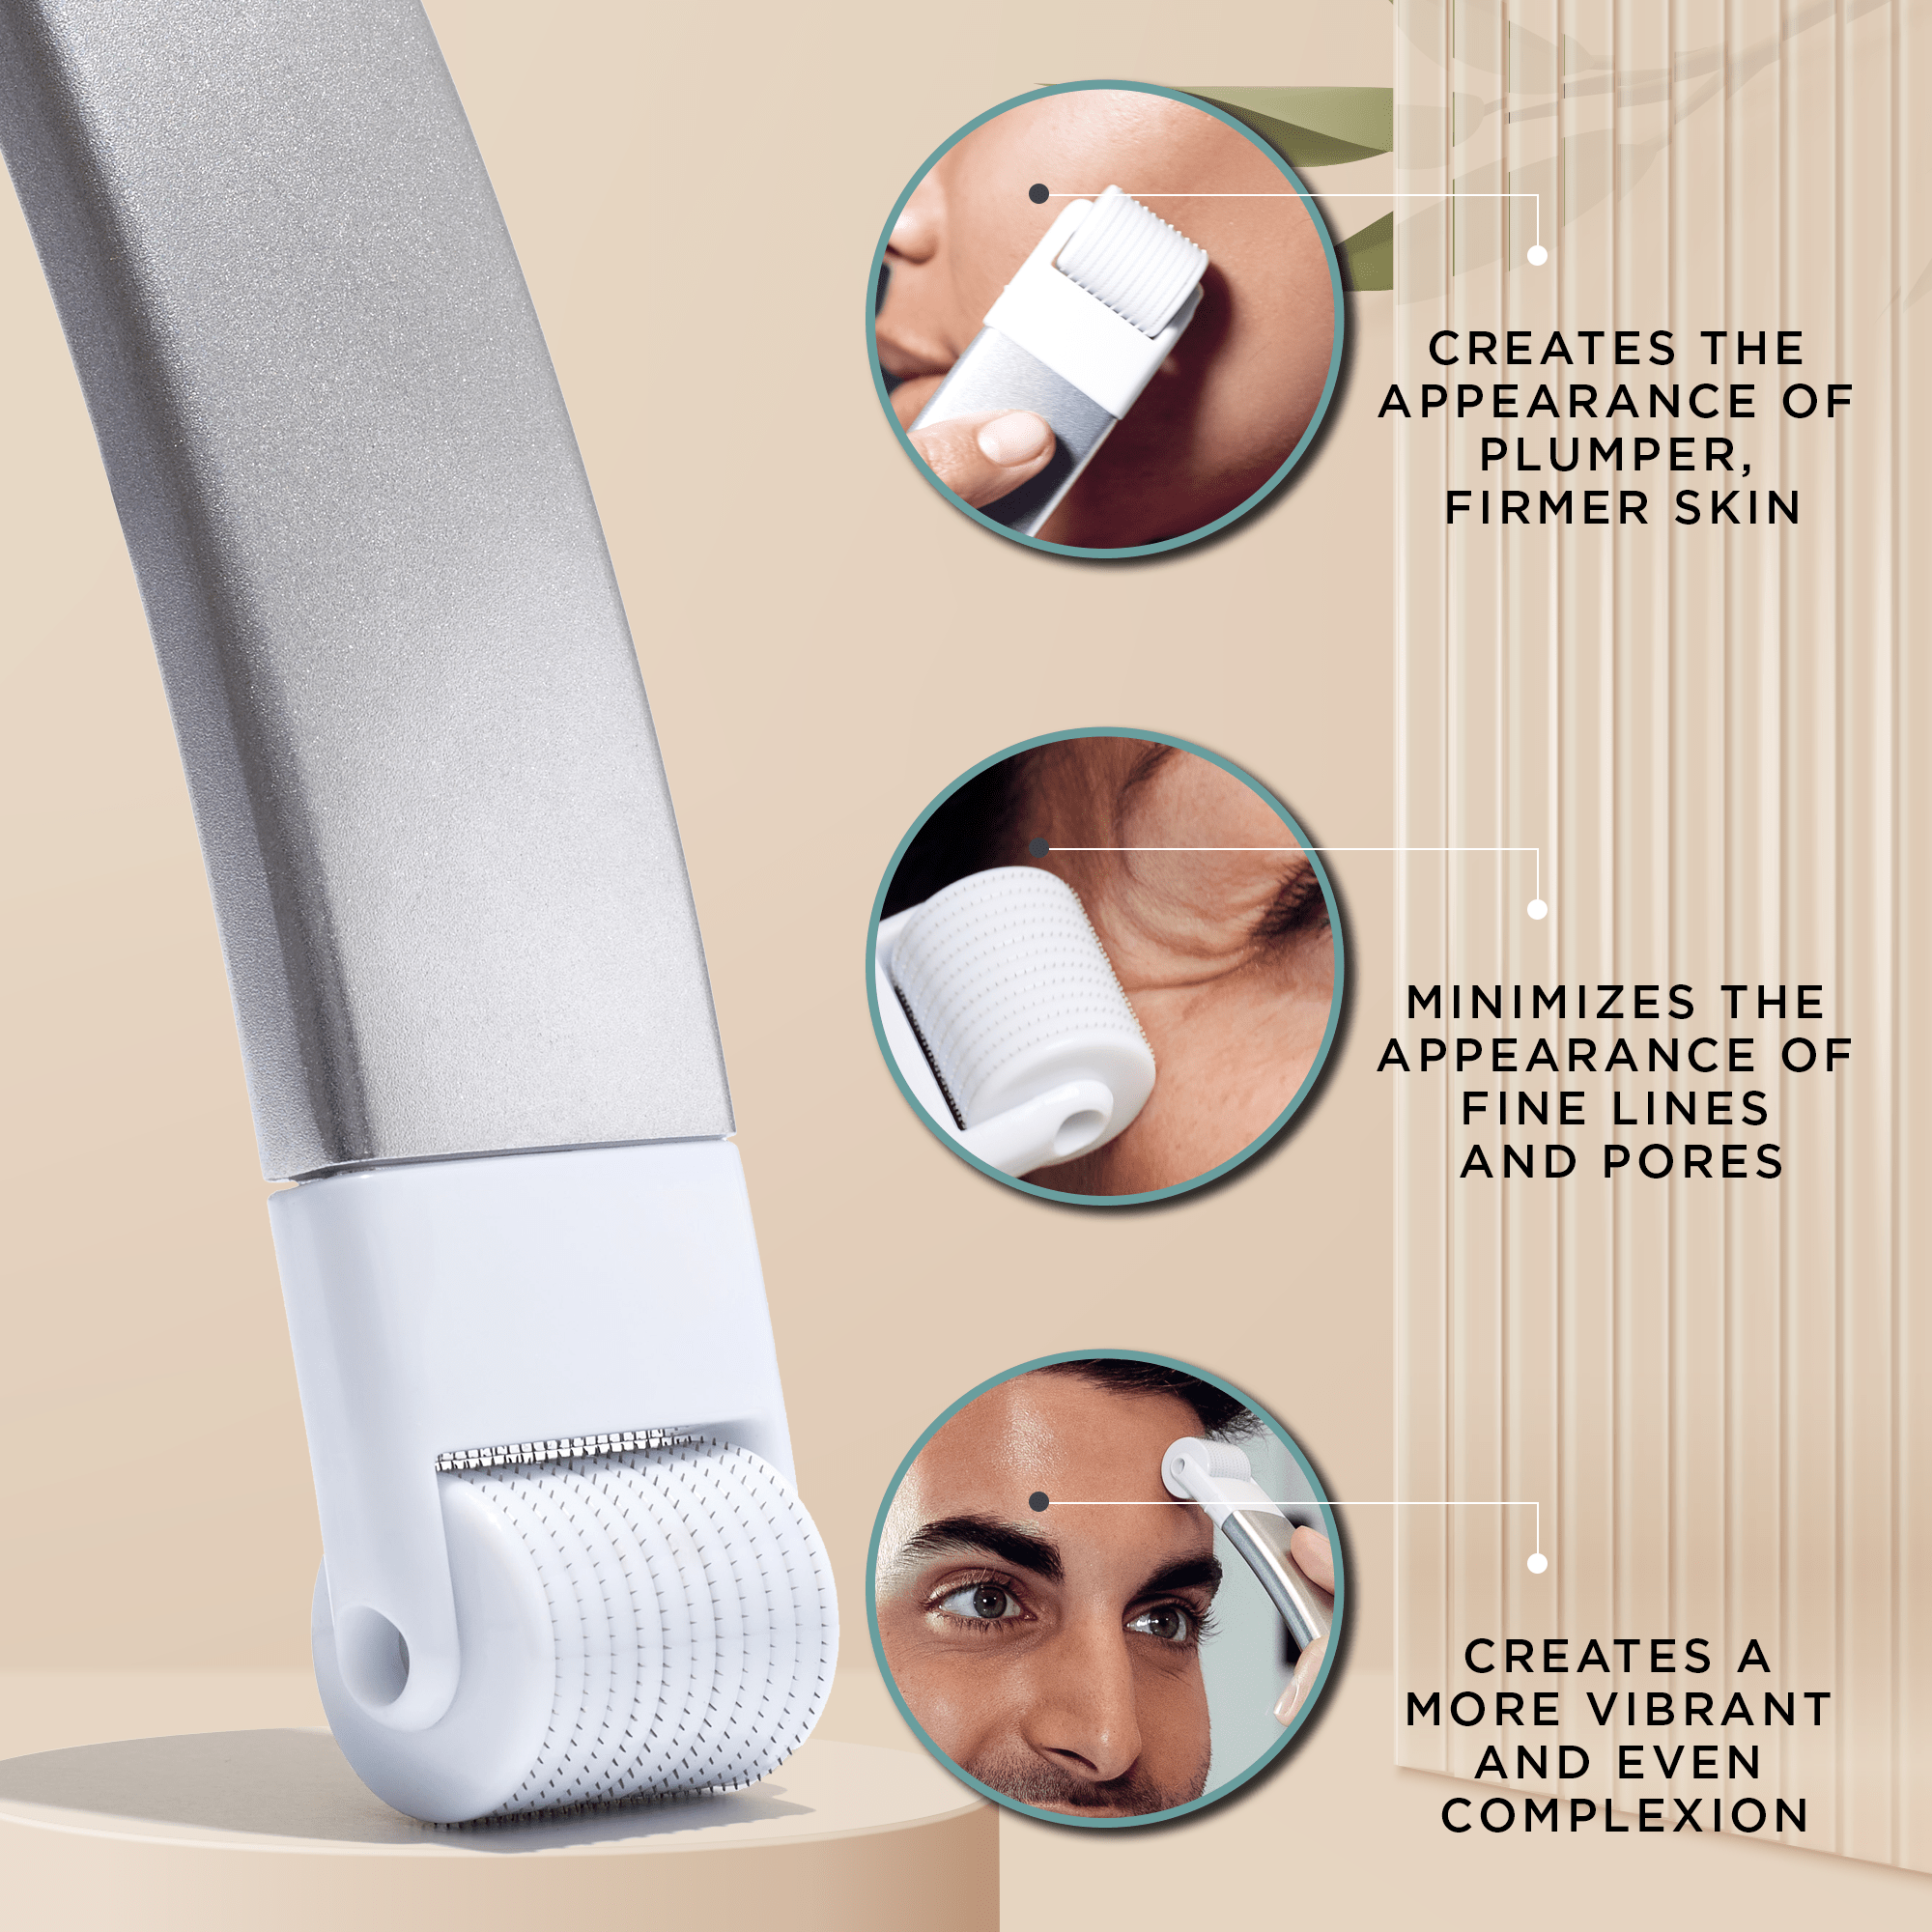 15 Best Derma Roller Options To Achieve Smoother, Plumper Skin In 2023